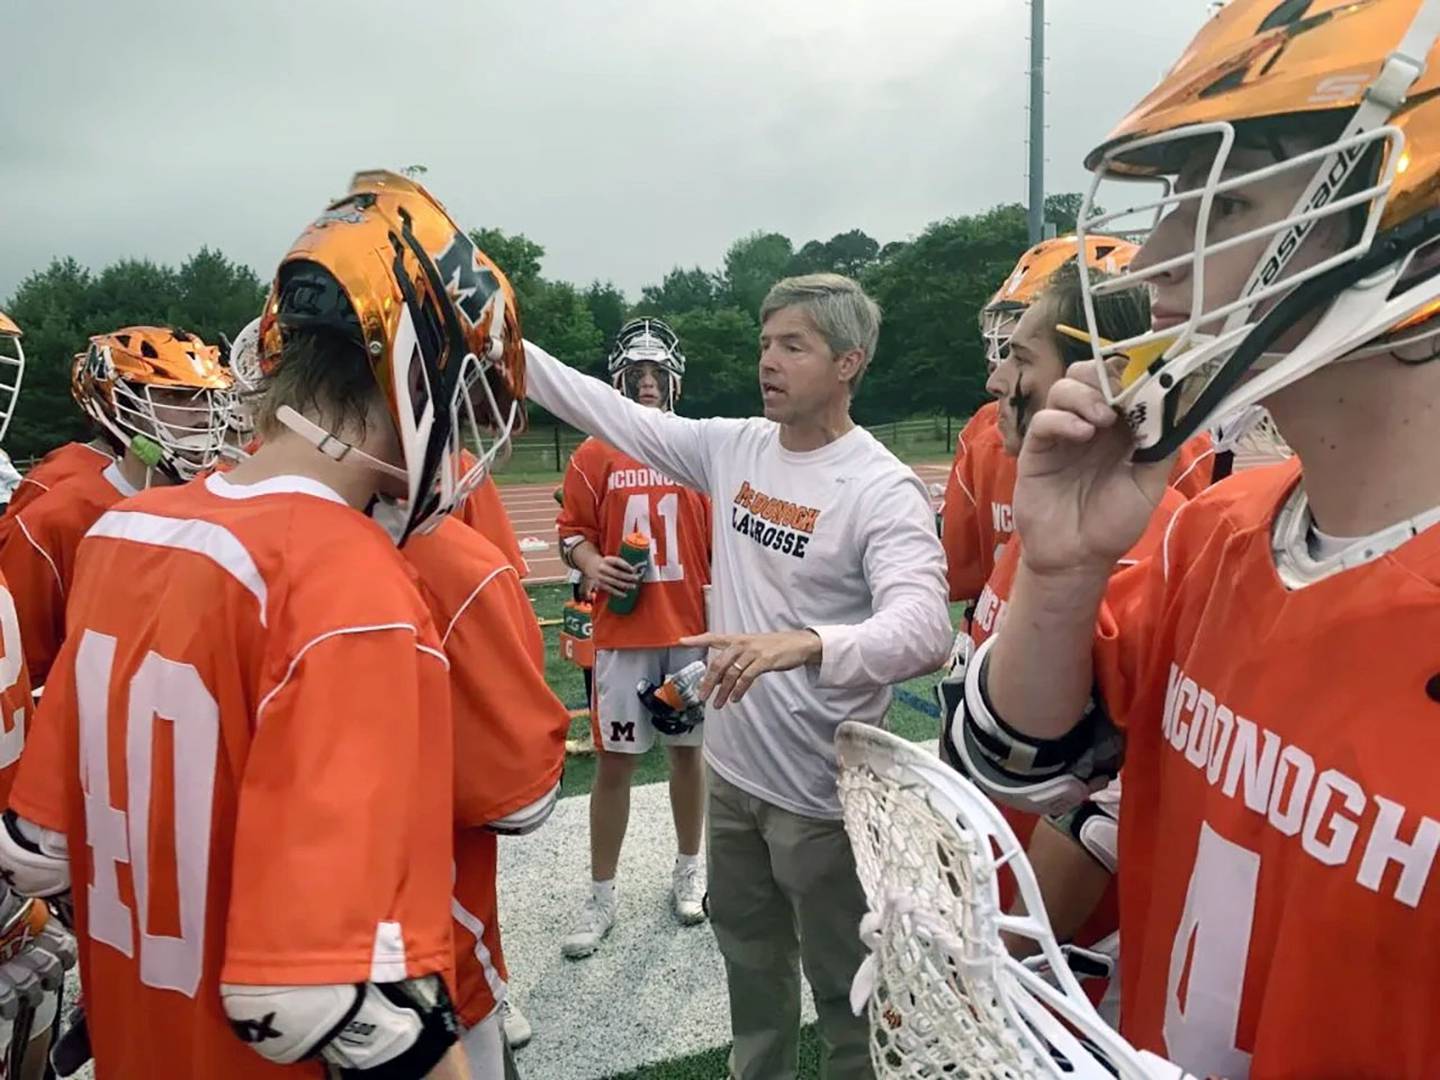 In the elite MIAA A Conference, little separates the top lacrosse team from the bottom, defending champion McDonogh, led by coach Andy Hilgartner (center) appears to have the pieces to once again top a league with a  bevy of national powers.